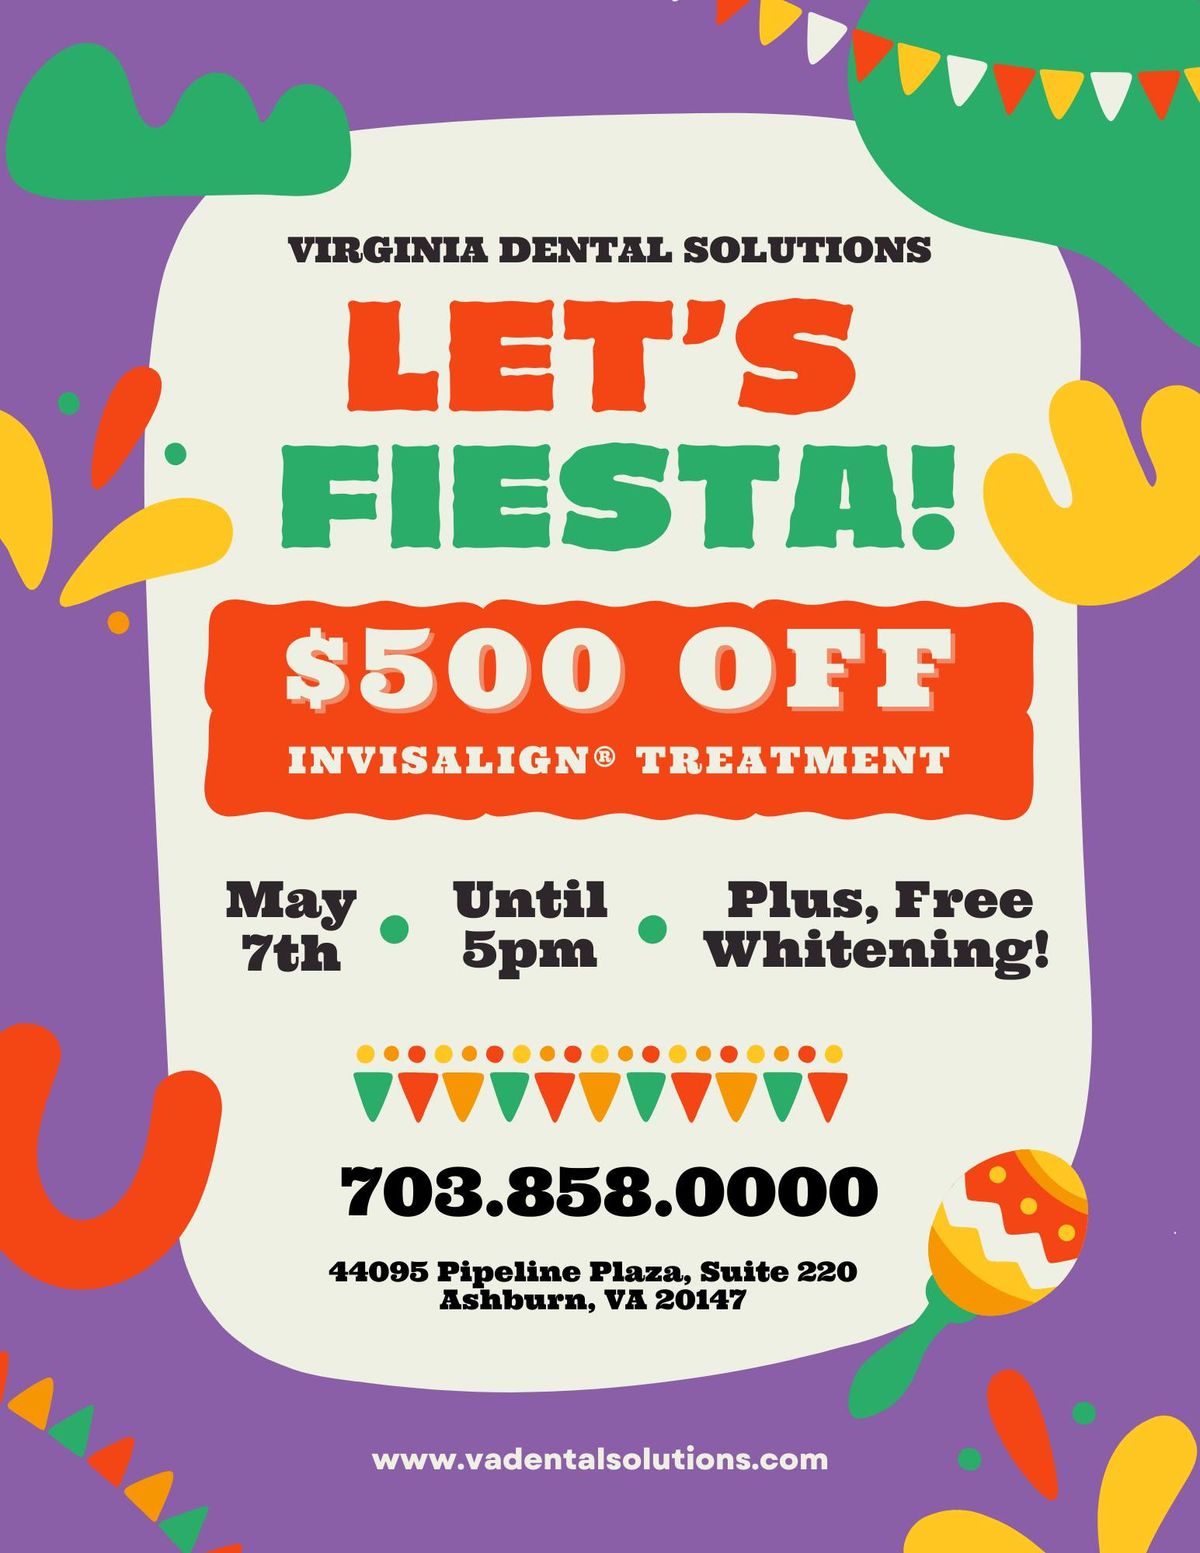 Let's Fiesta! Join us for $500 OFF Invisalign Treatment